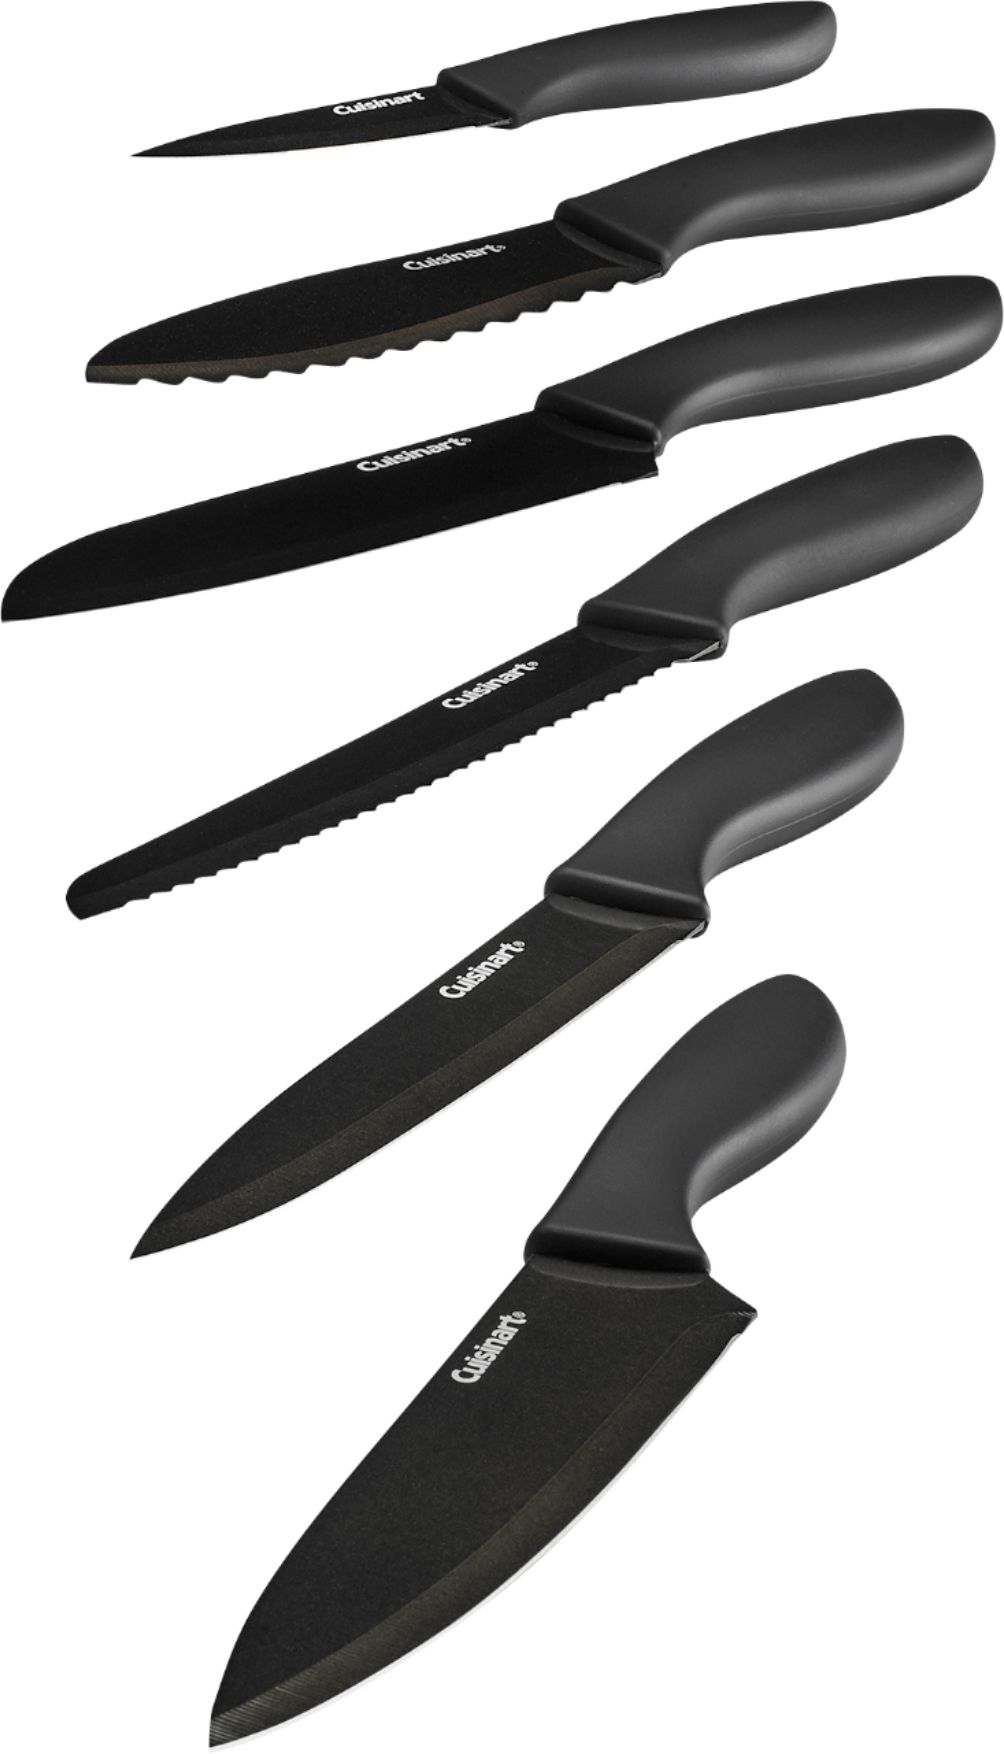 Cuisinart 12pc Coated Knife Set with Blade Guards Black  - Best Buy